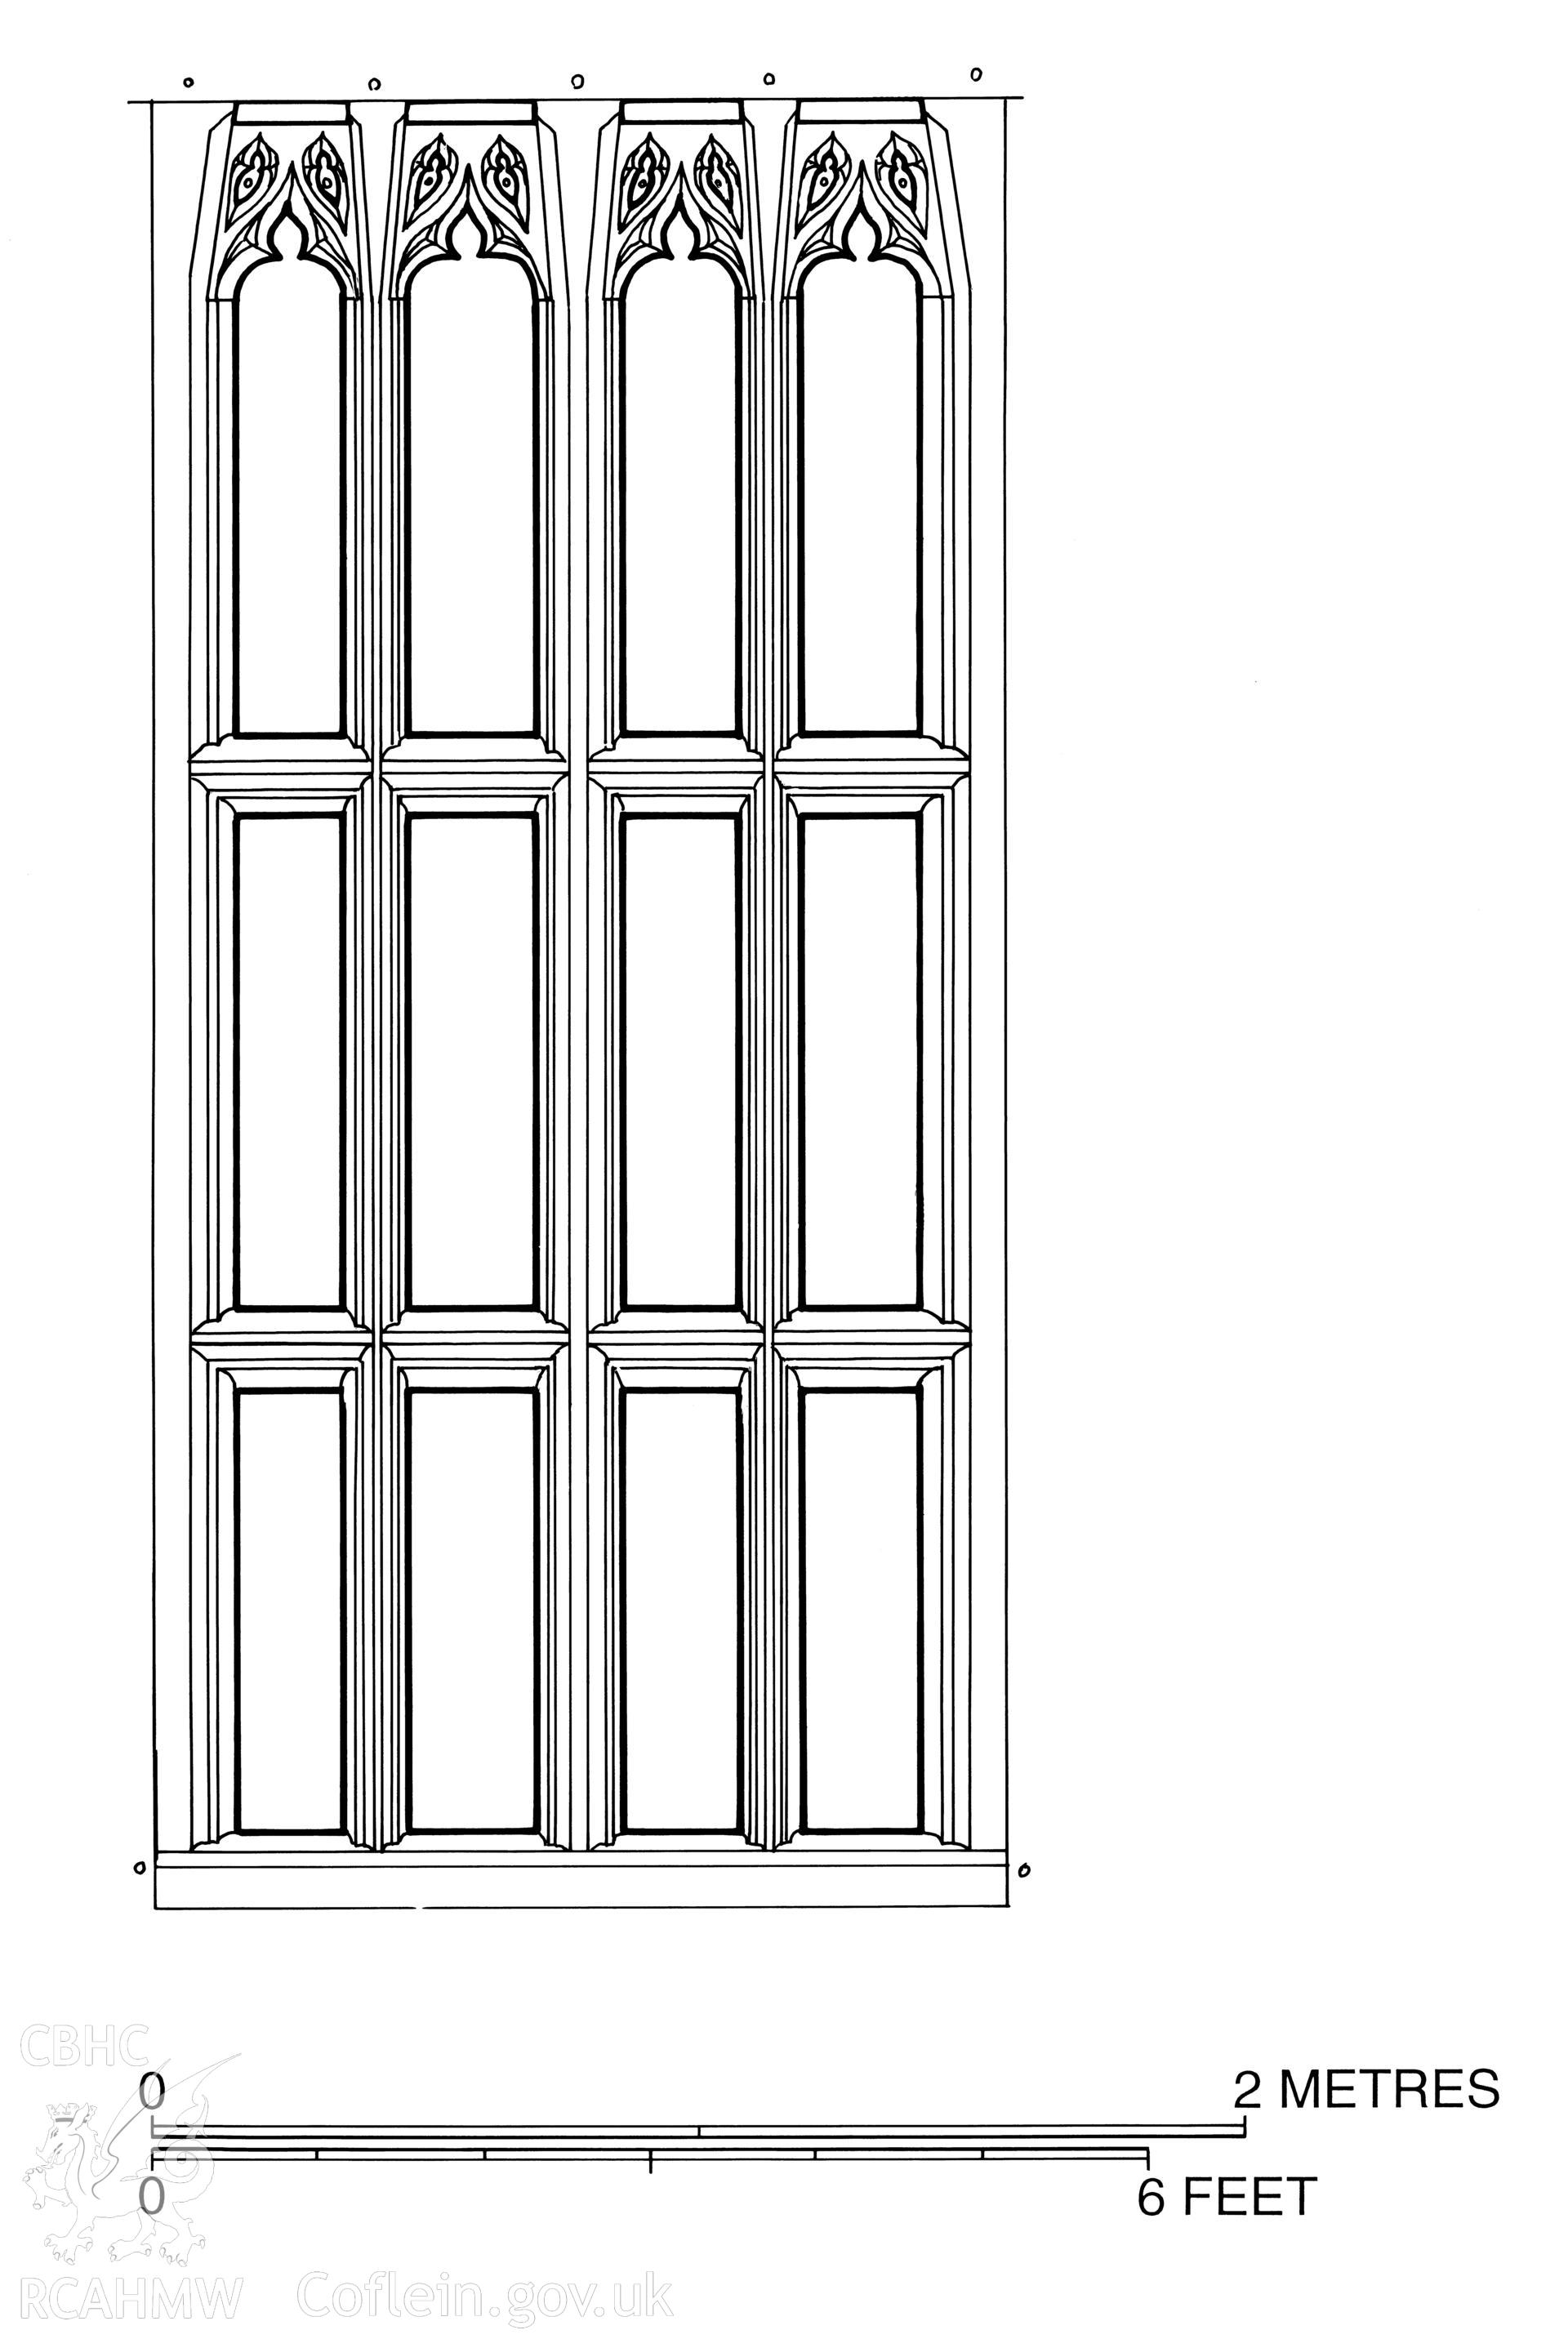 Measured drawing showing reconstruction view of hall window at Bryndraenog, Bugeildy.